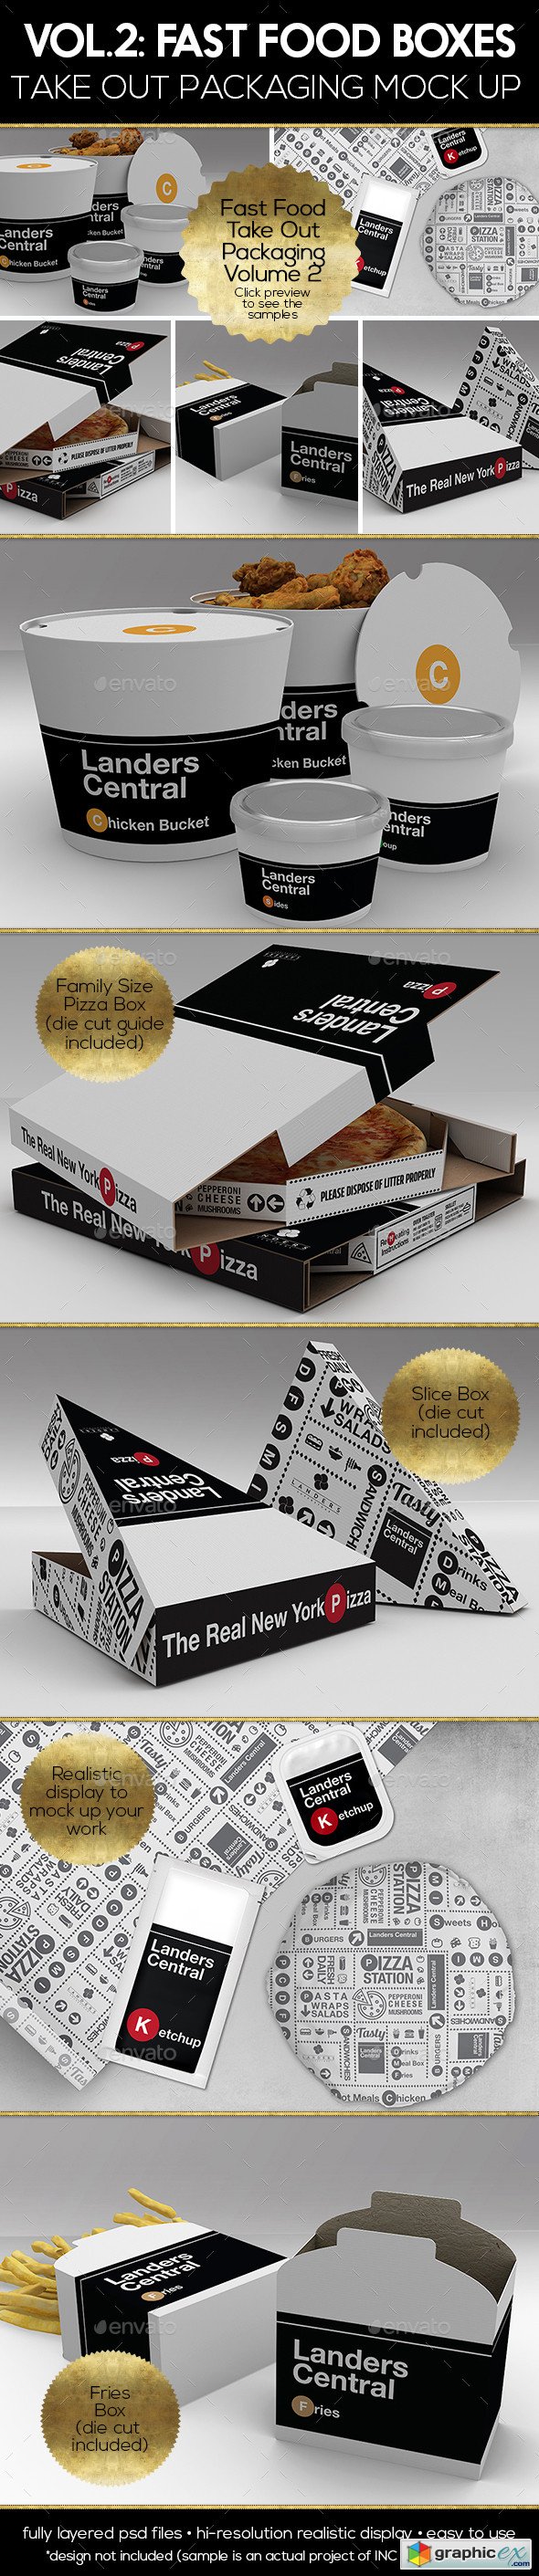 Fast Food Boxes Vol.2:Take Out Packaging Mock Ups